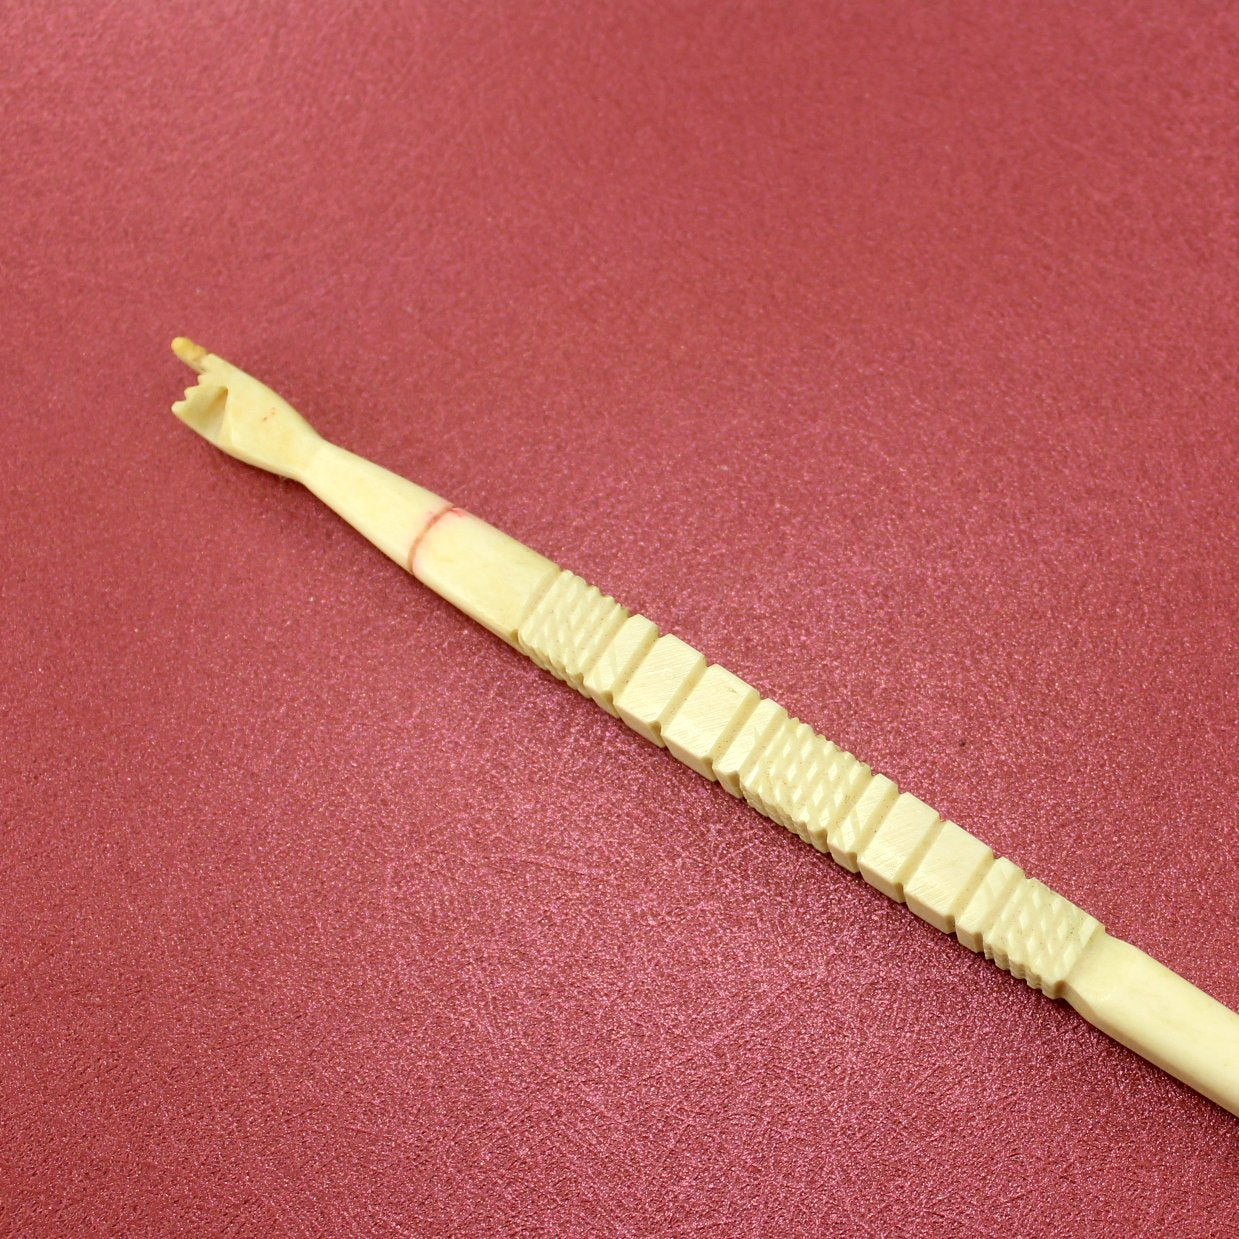 Exquisite Collectible Antique Bone Ivory Crochet Hook Carved Hand Top Decorated Handle close view pattern